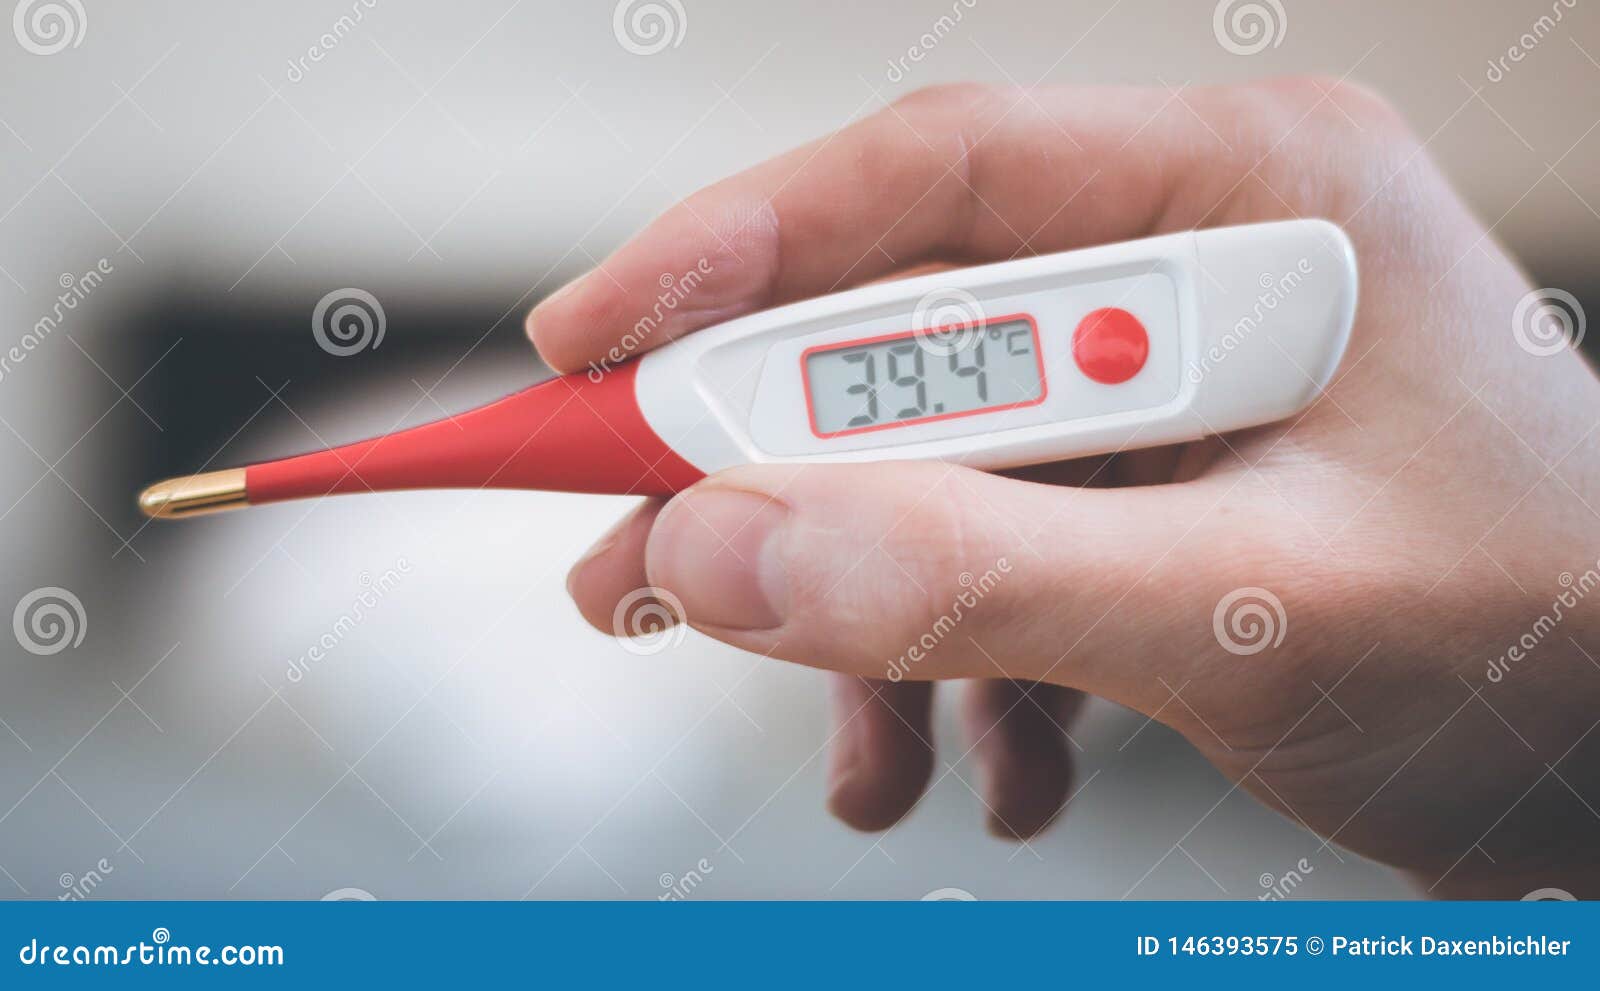 man is holding a fever thermometer in his hand